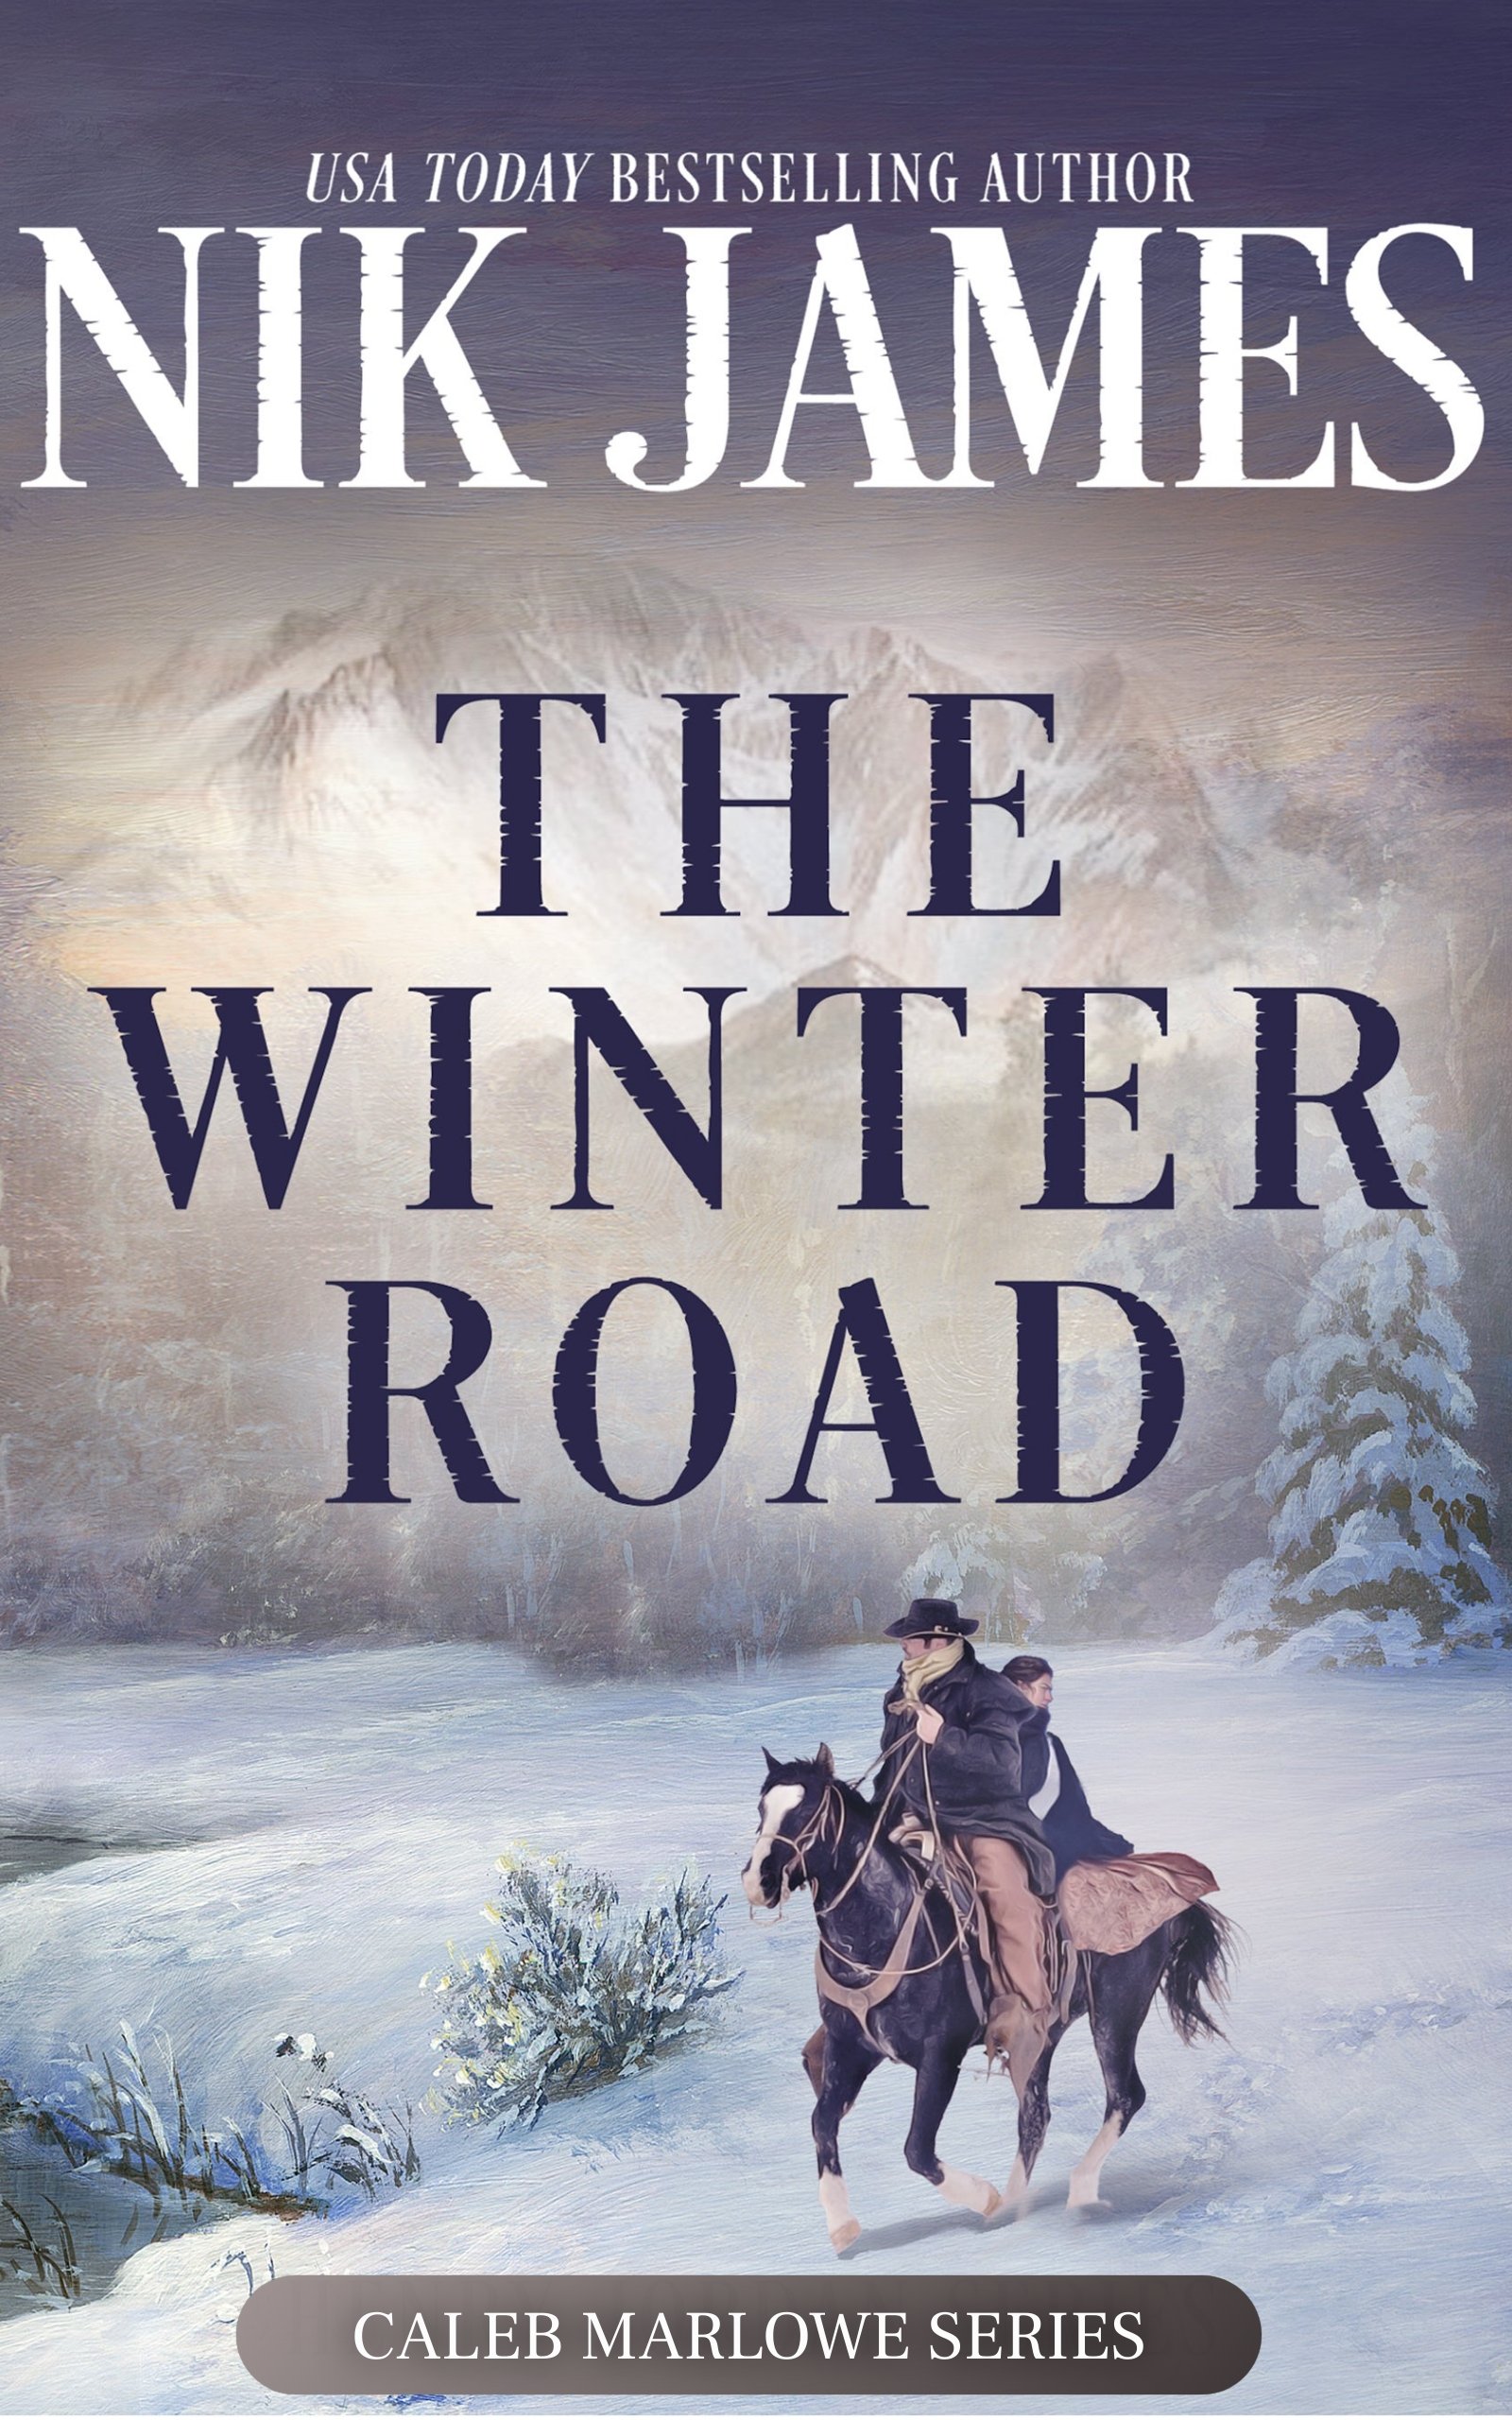 NEW EBOOK COVER THE WINTER ROAD.jpeg